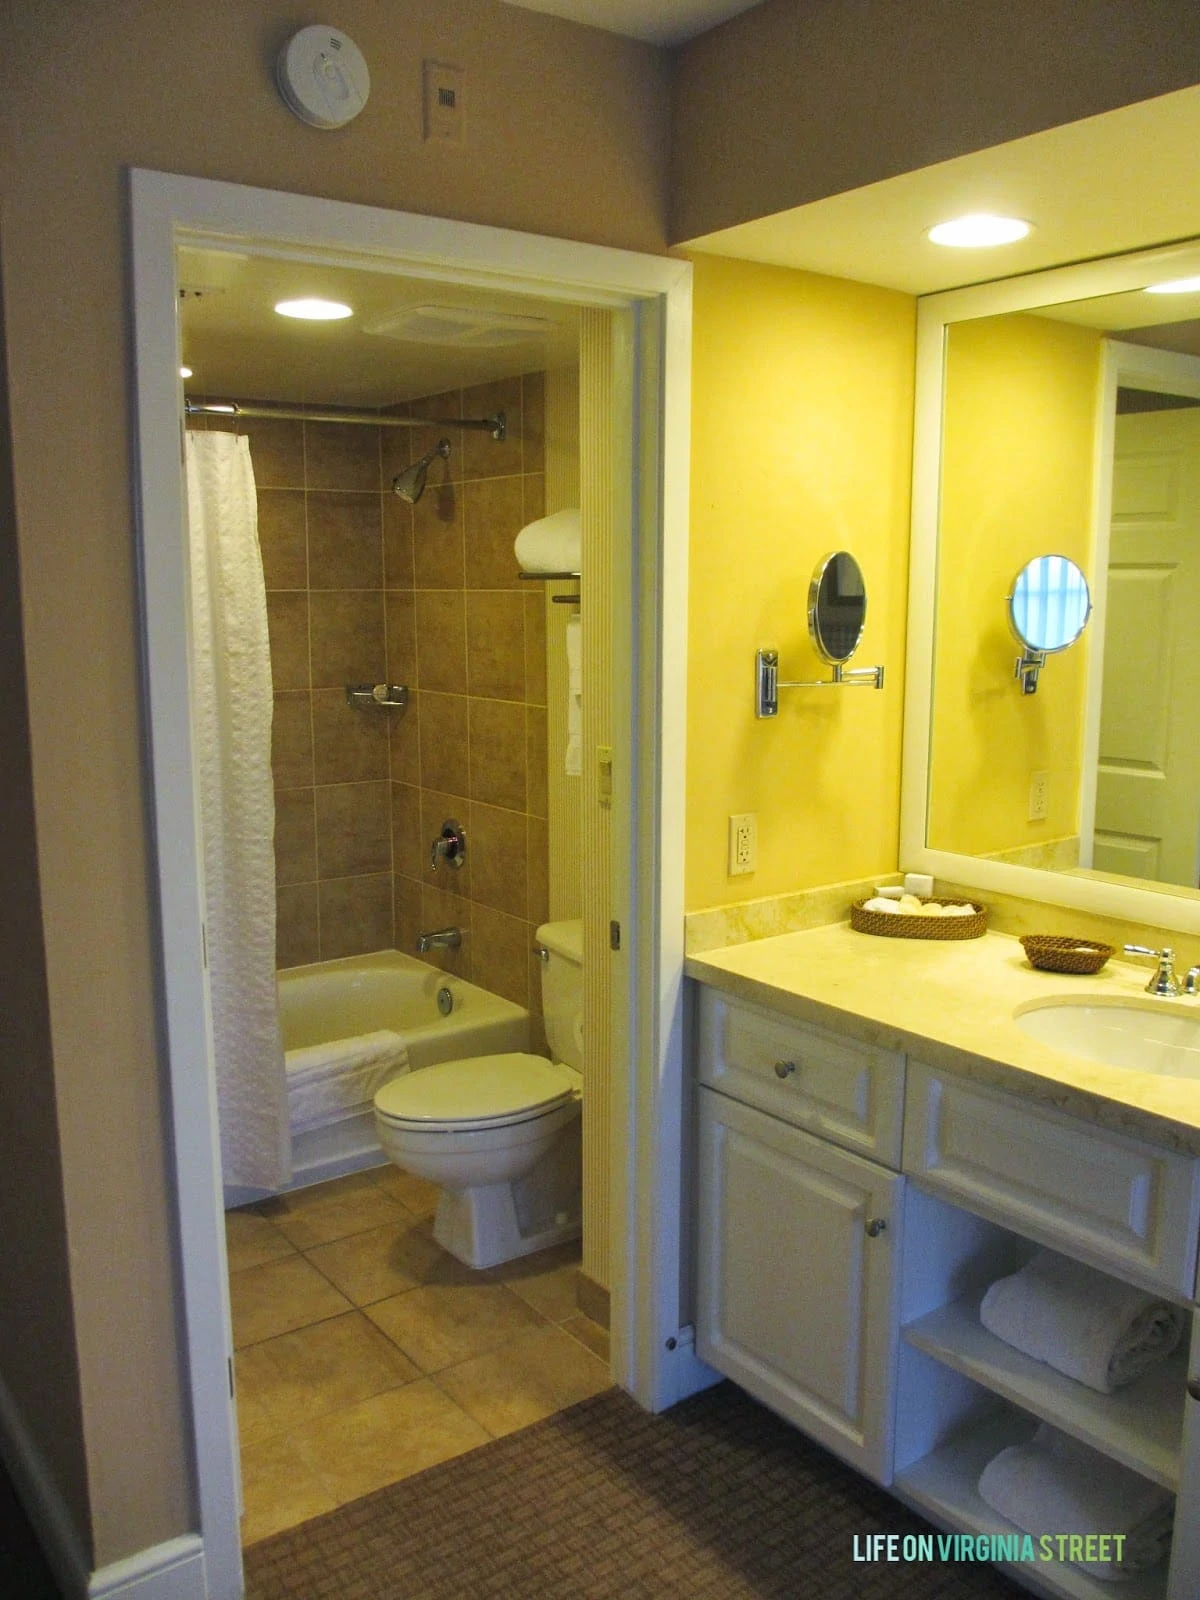 A sink and vanity plus the bathroom with a tub.